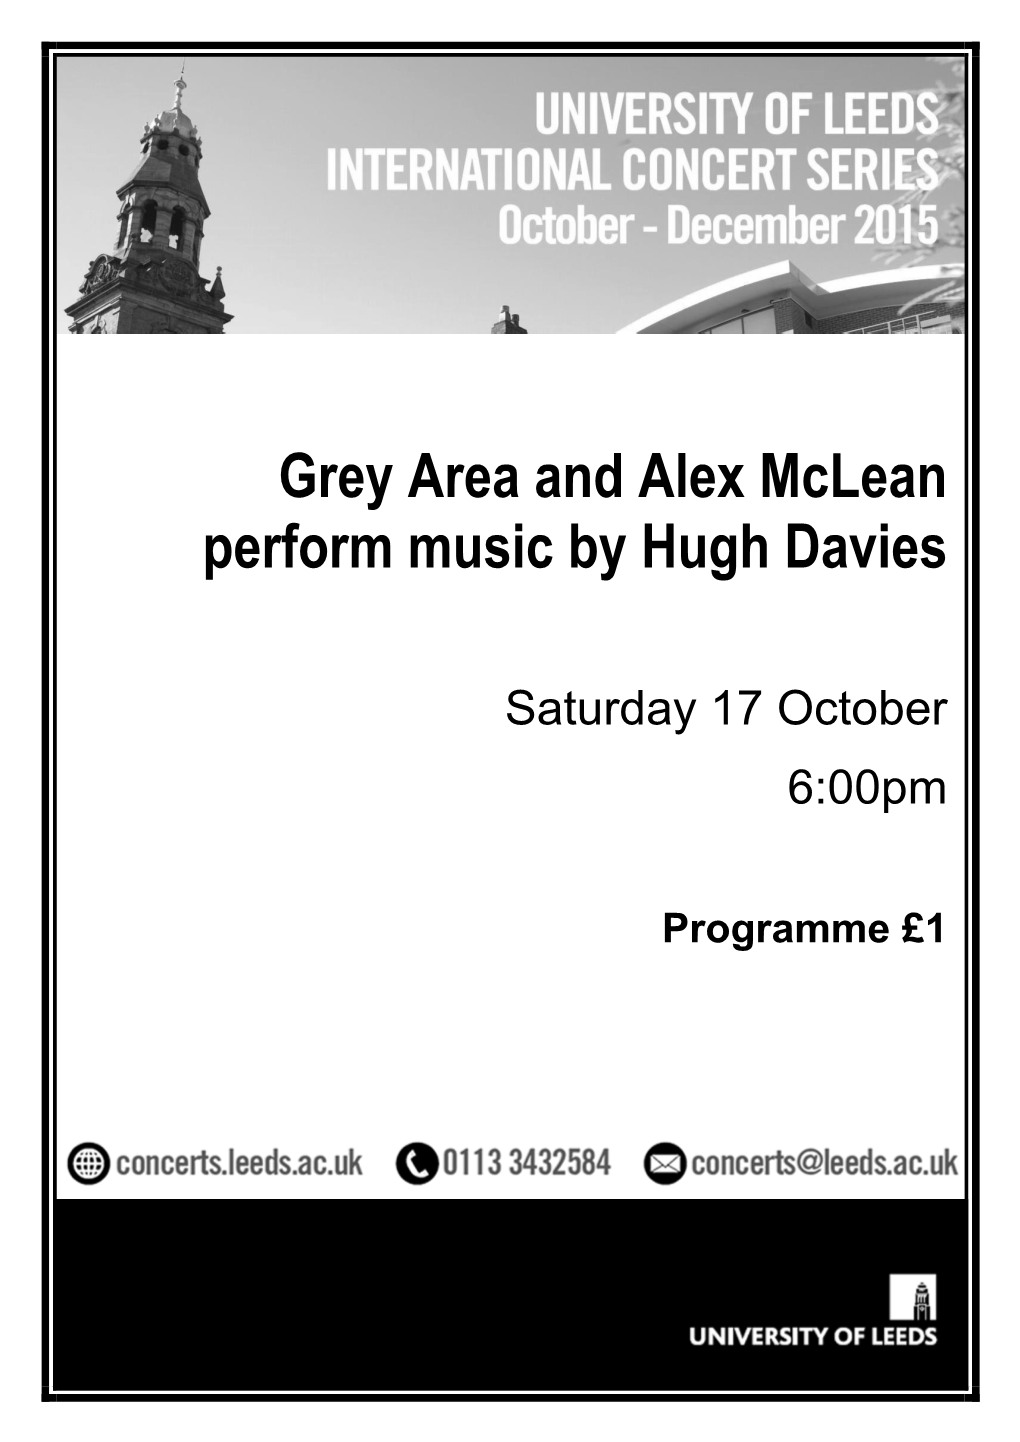 Grey Area and Alex Mclean Perform Music by Hugh Davies